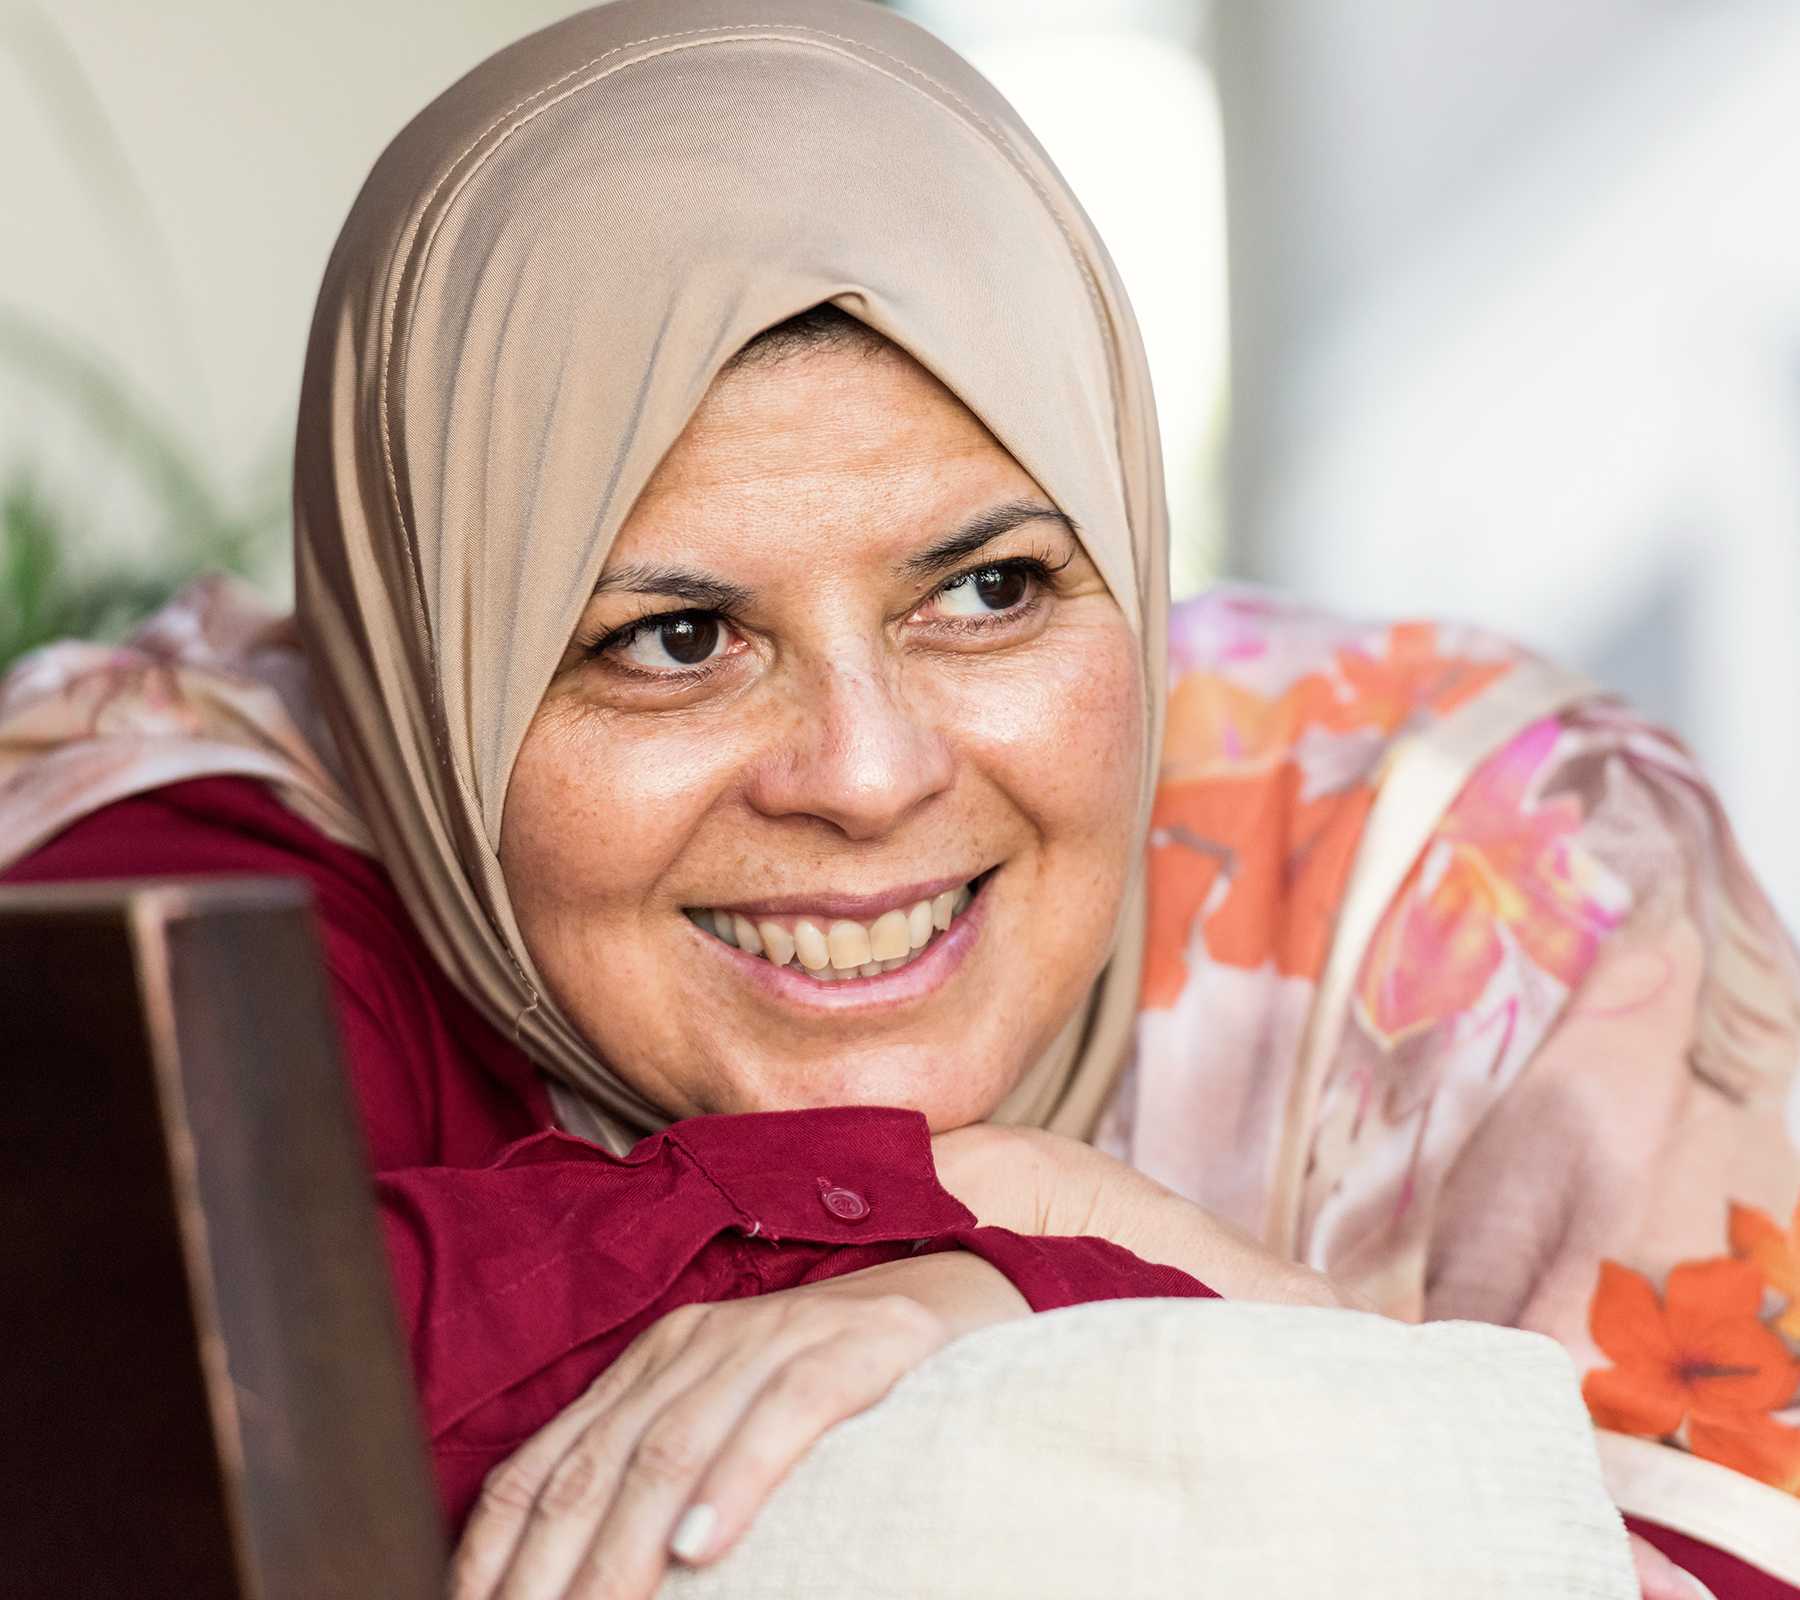 Close up picture of a smiling mature Middle Eastern Muslim woman wearing a veil posing indoors.